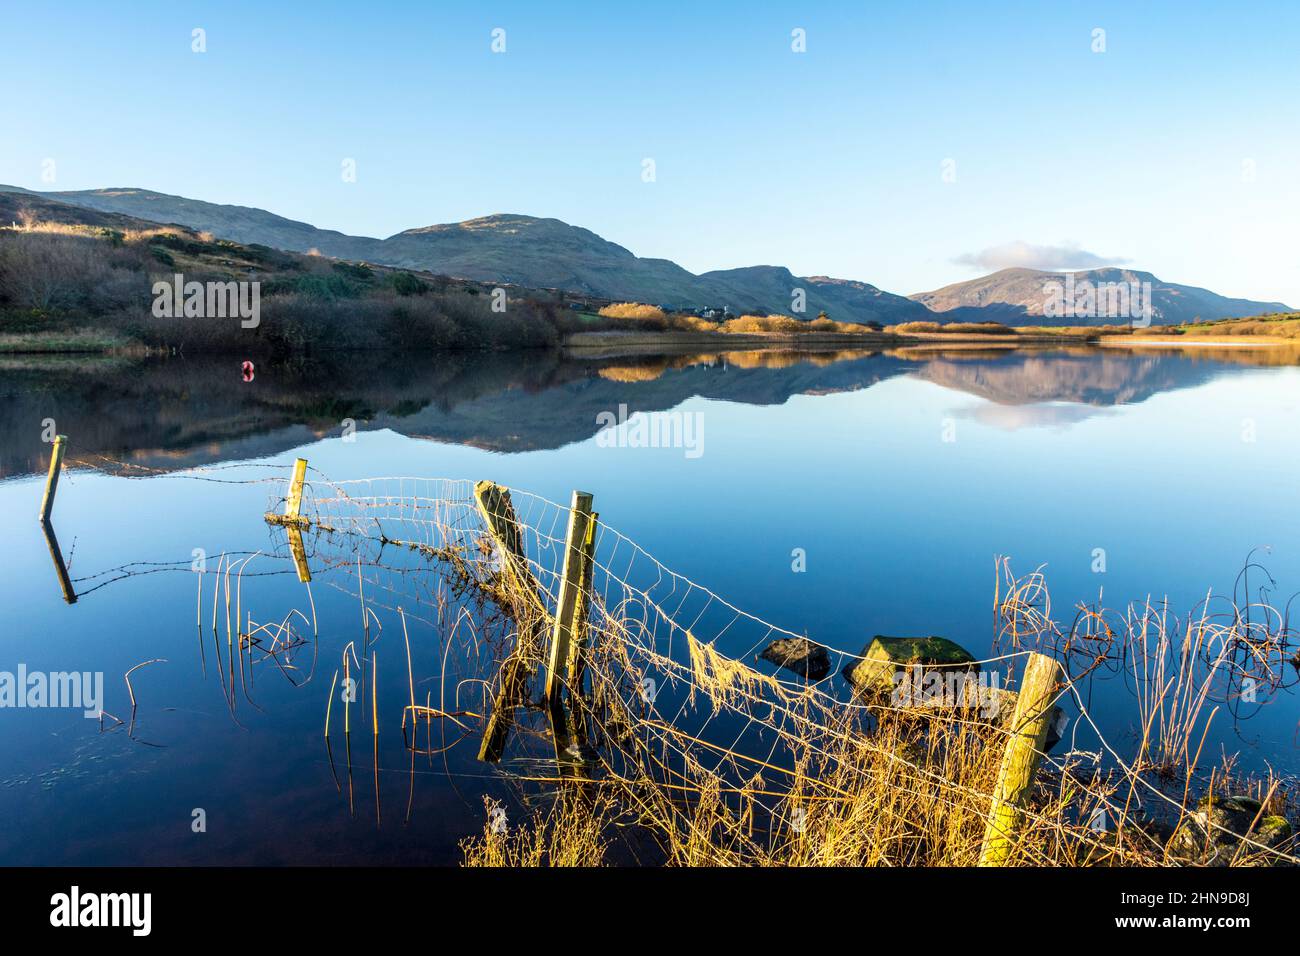 Lake Shanaghan, Loughros Point, Ardara, County Donegal, Ireland on a still morning. Stock Photo